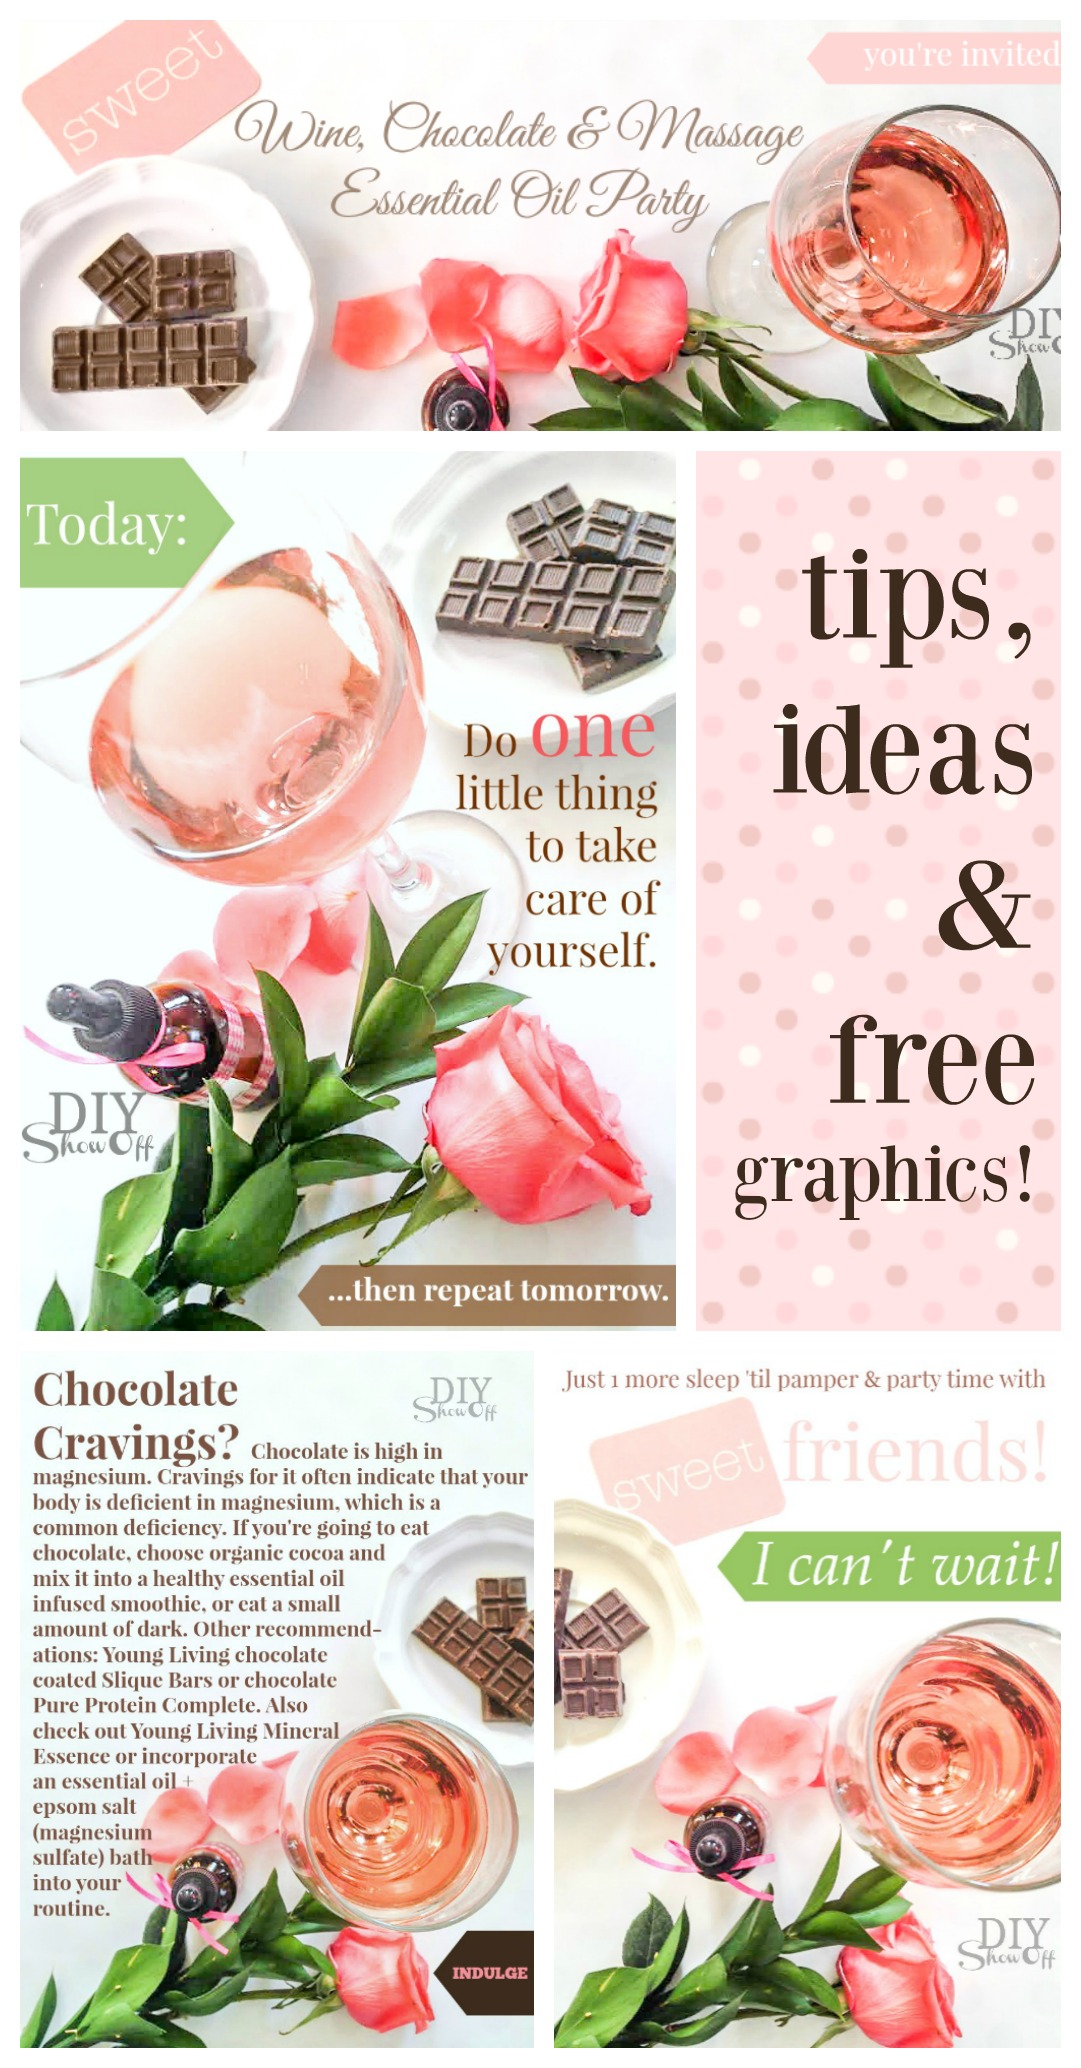 How fun! Get free graphics, tips and ideas for hosting an essential oils party with a chocolate & massage theme @diyshowoff